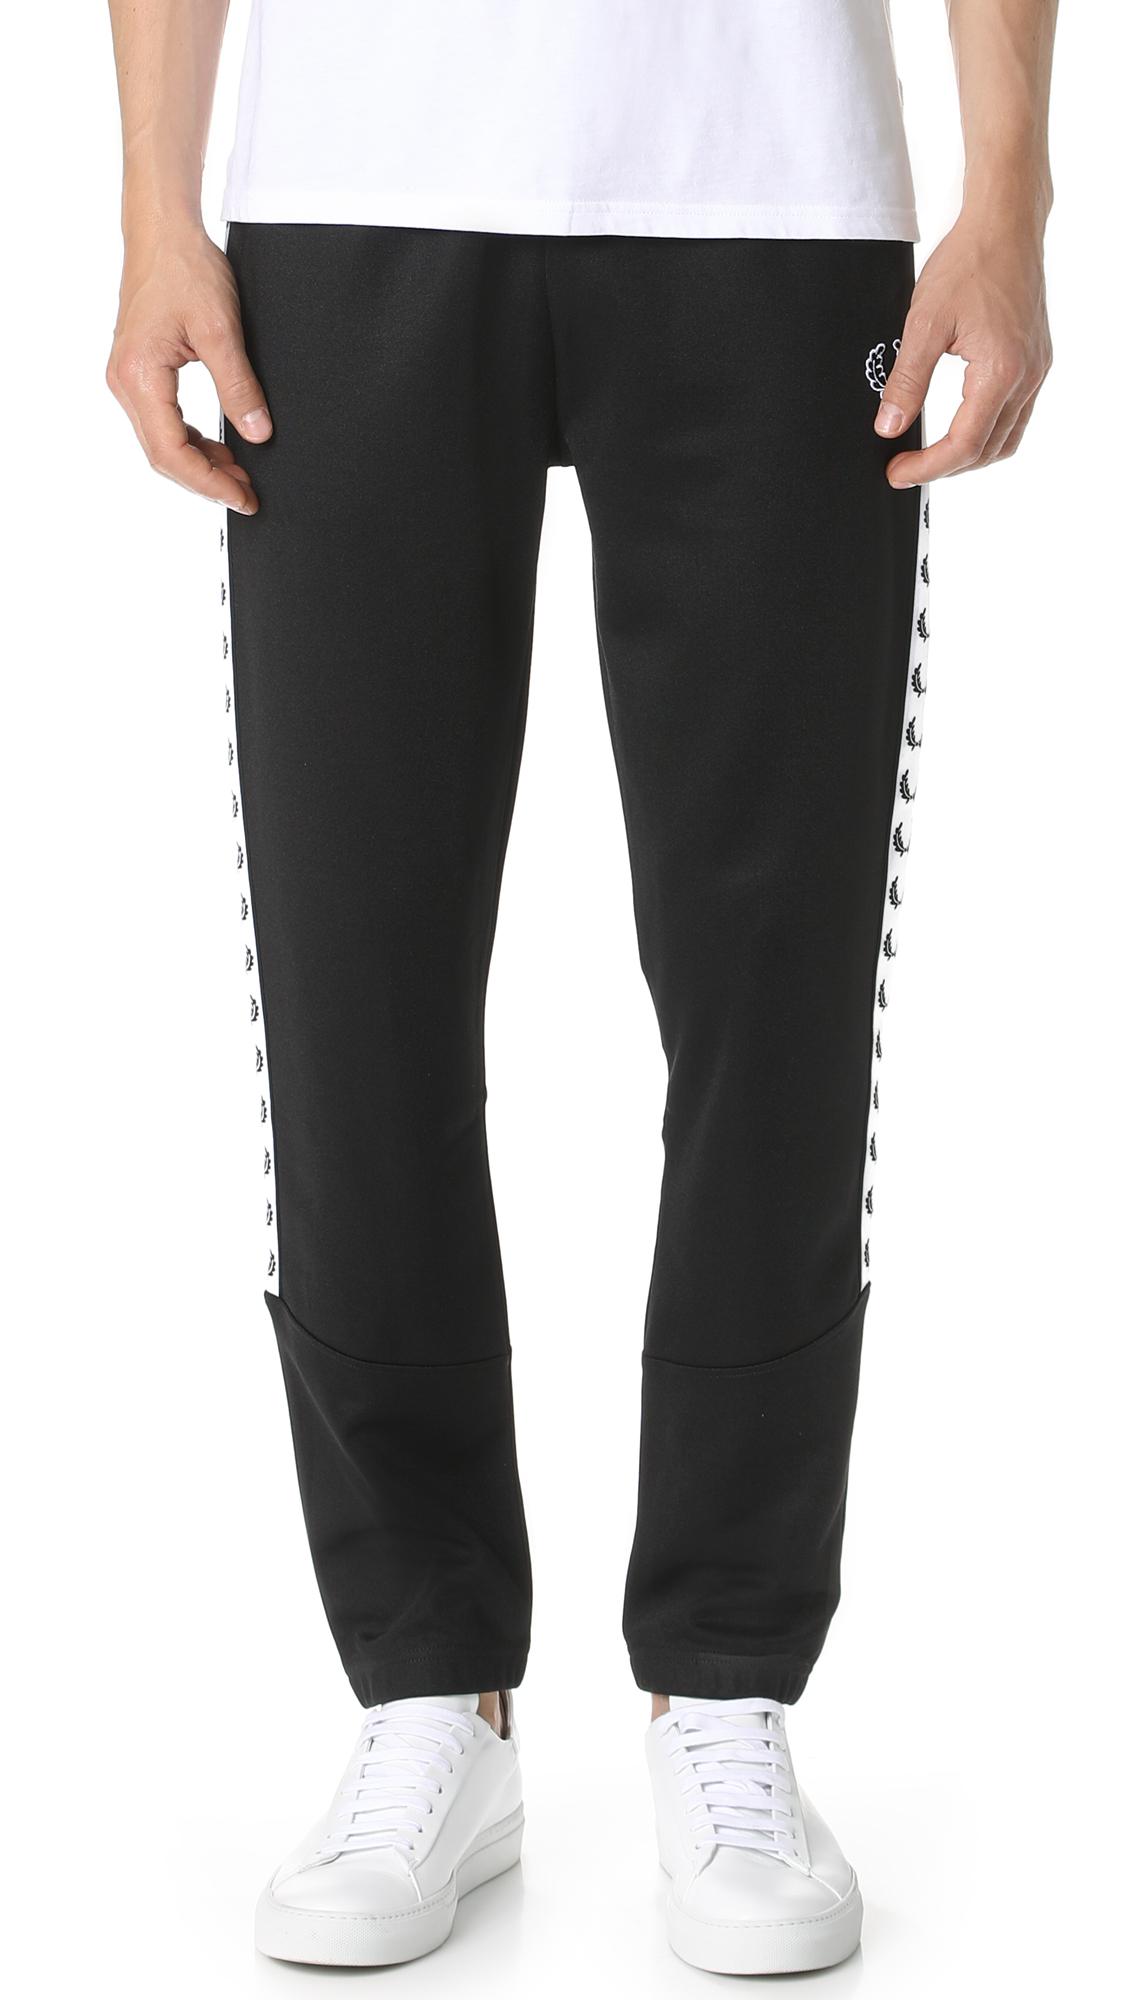 Lyst - Fred Perry Taped Track Pants in Black for Men